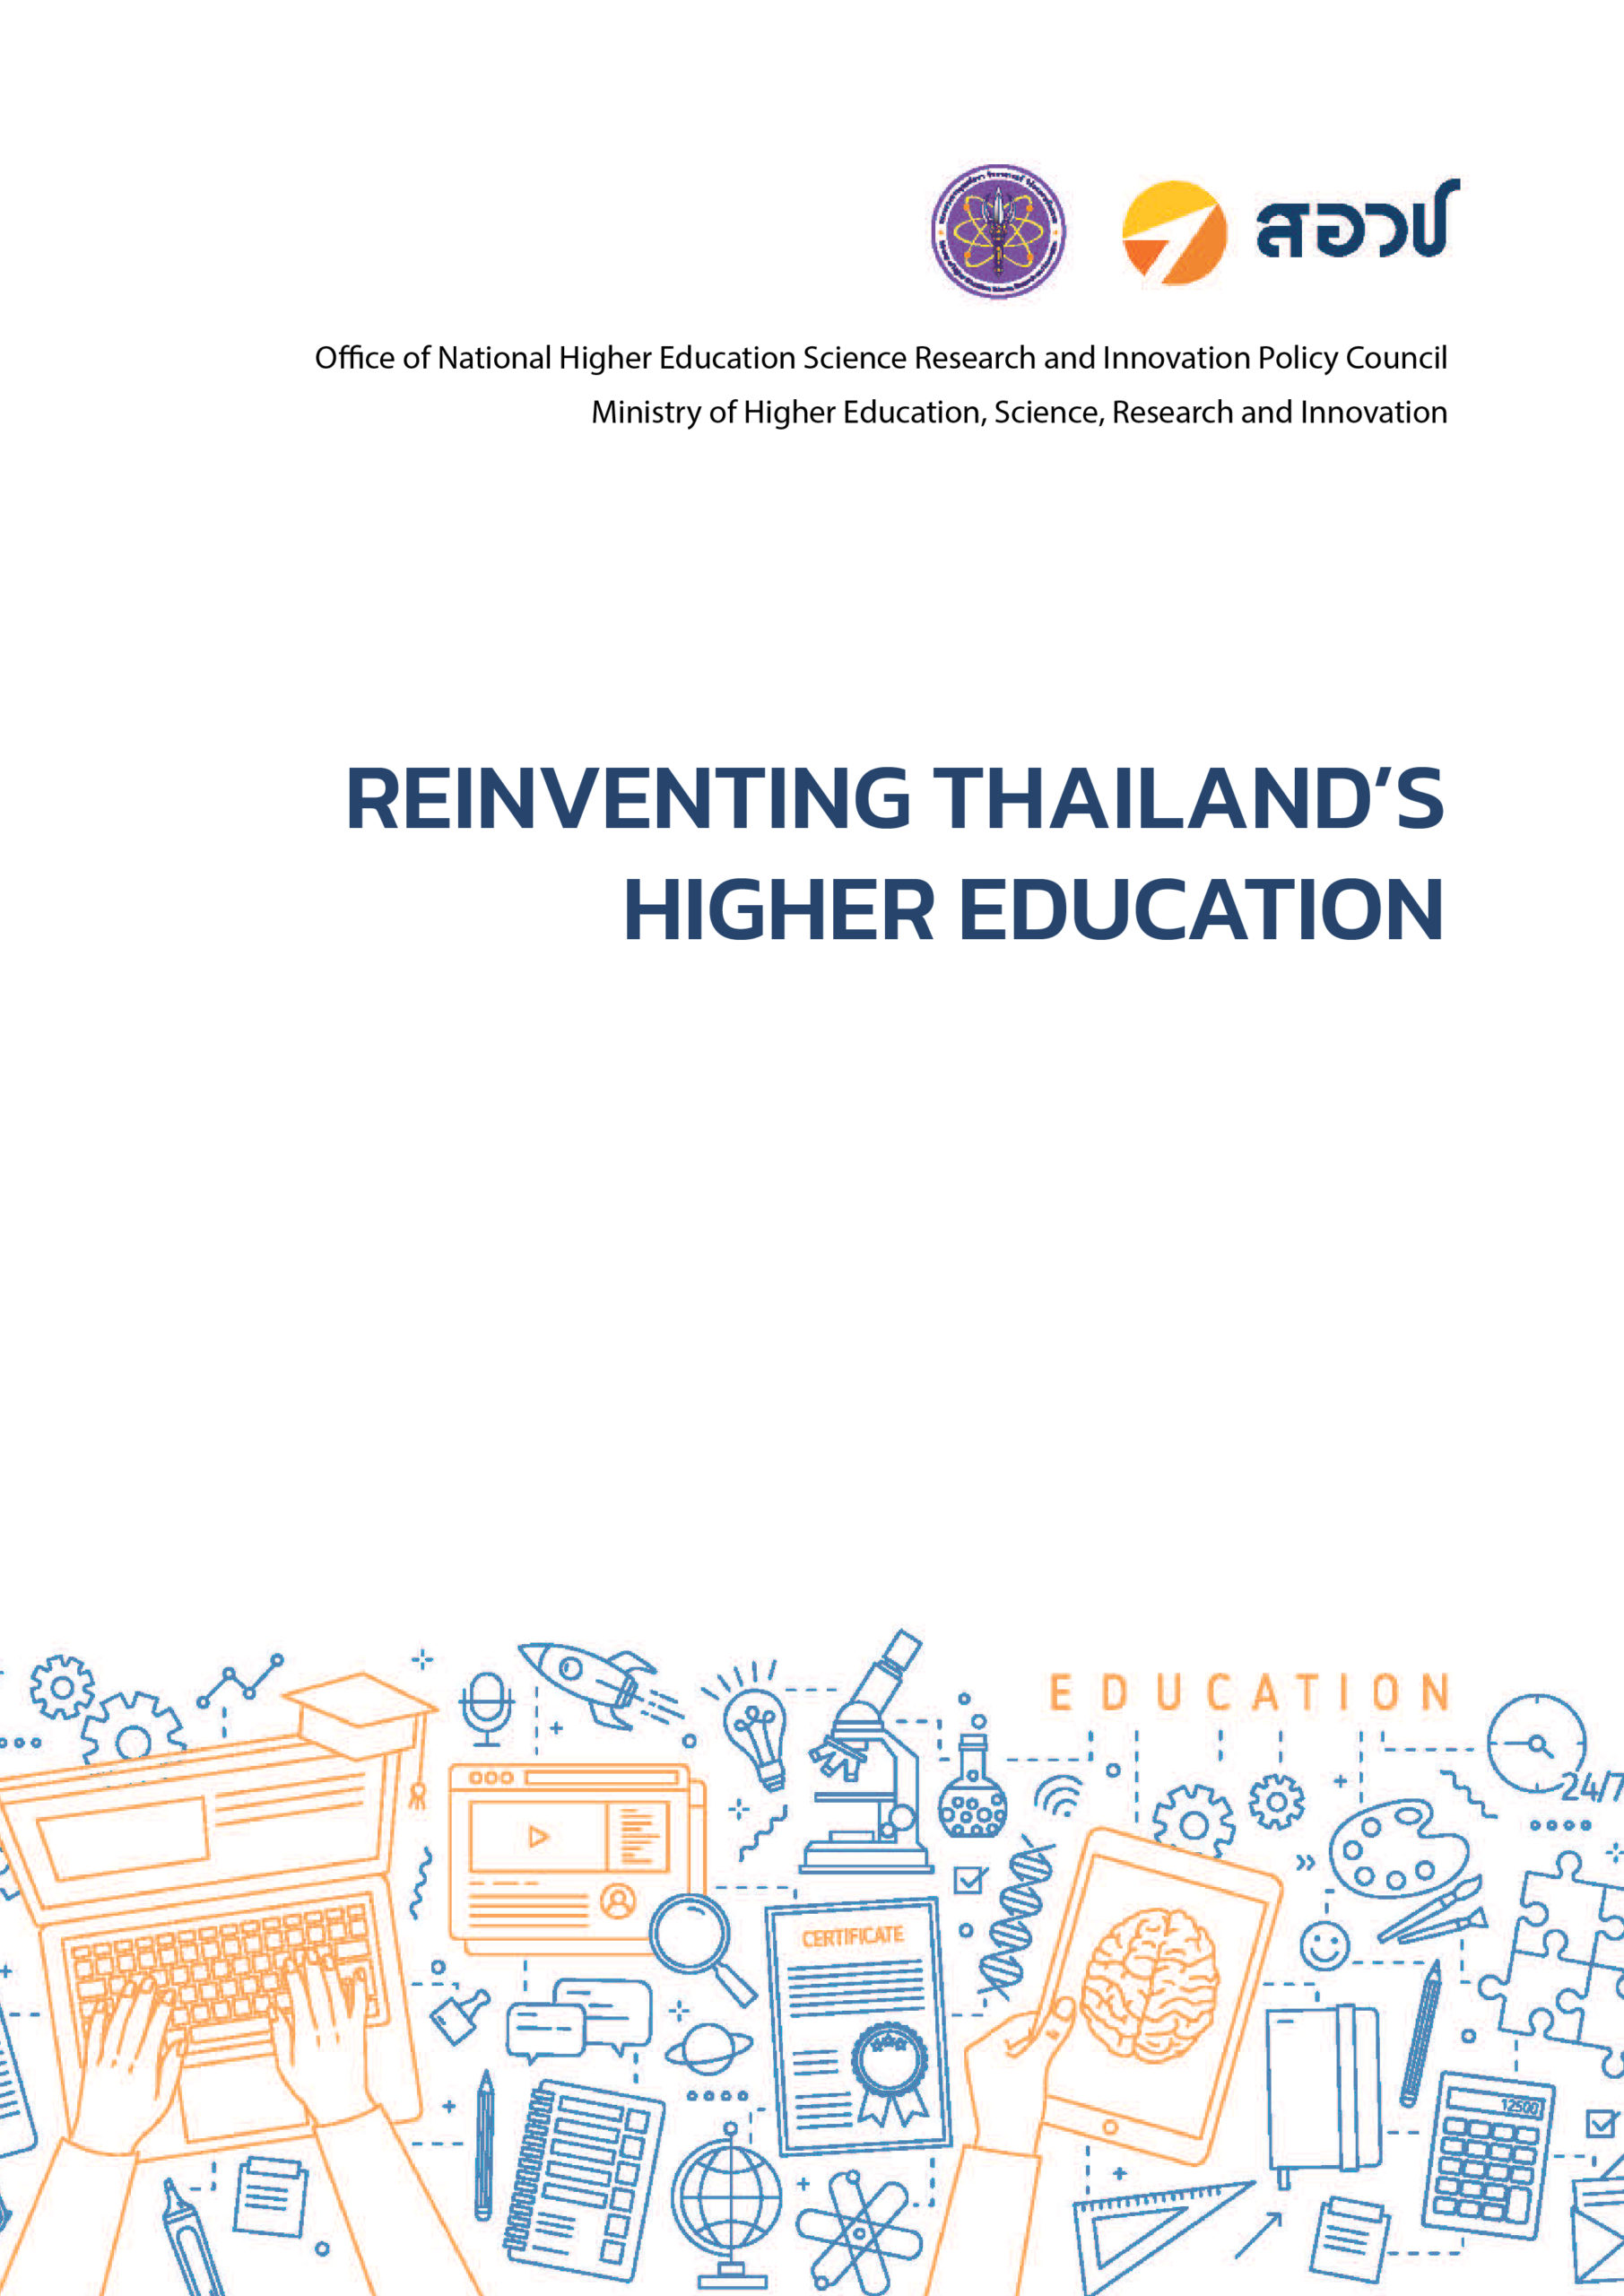 REINVENTING THAILAND’S HIGHER EDUCATION